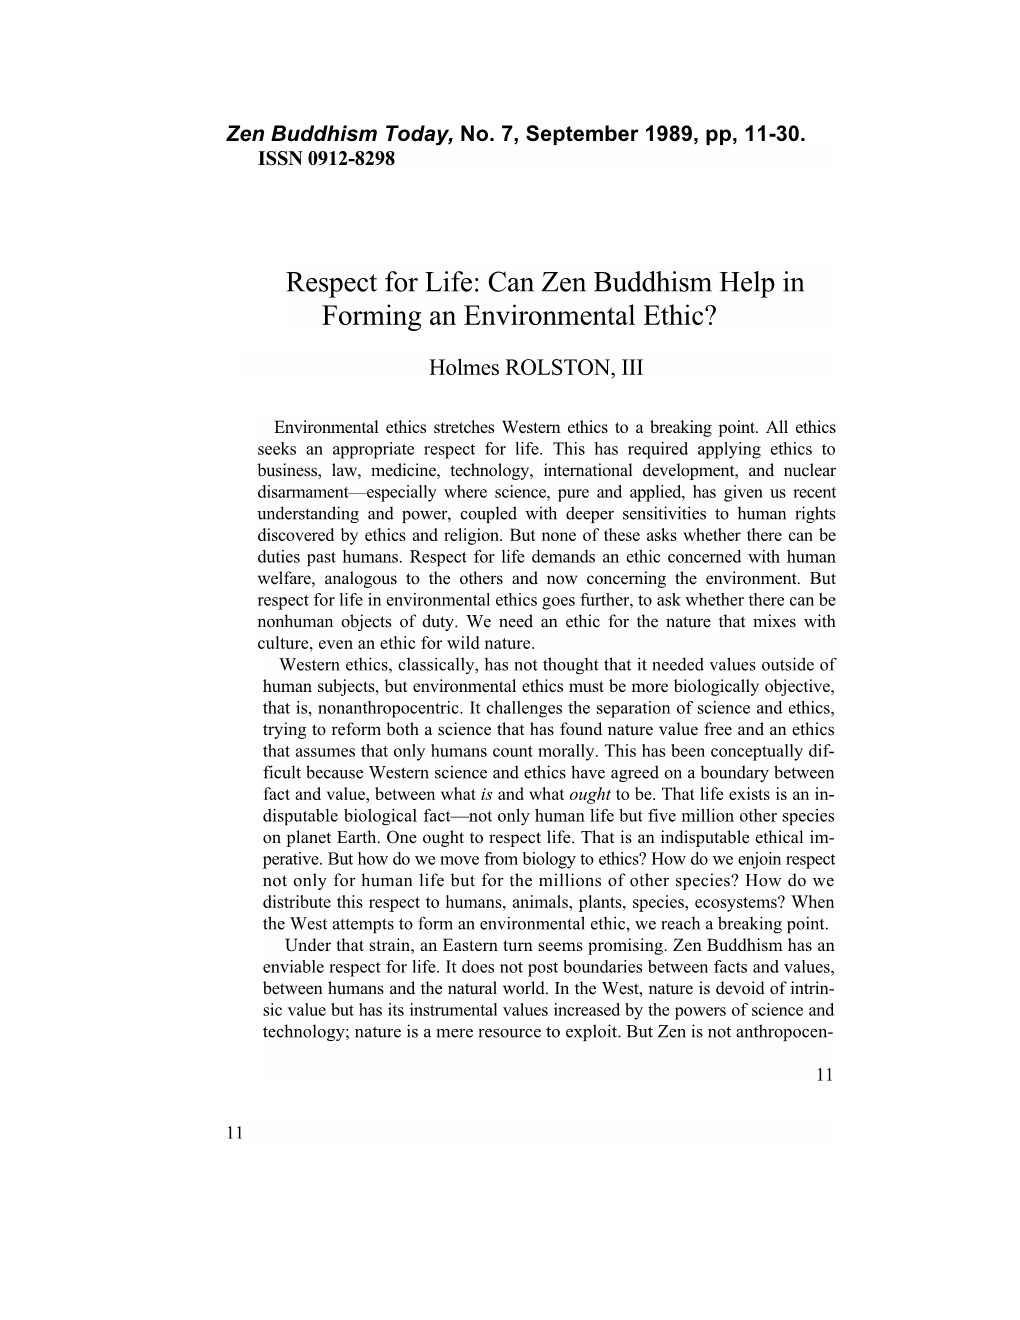 Respect for Life: Can Zen Buddhism Help in Forming an Environmental Ethic?